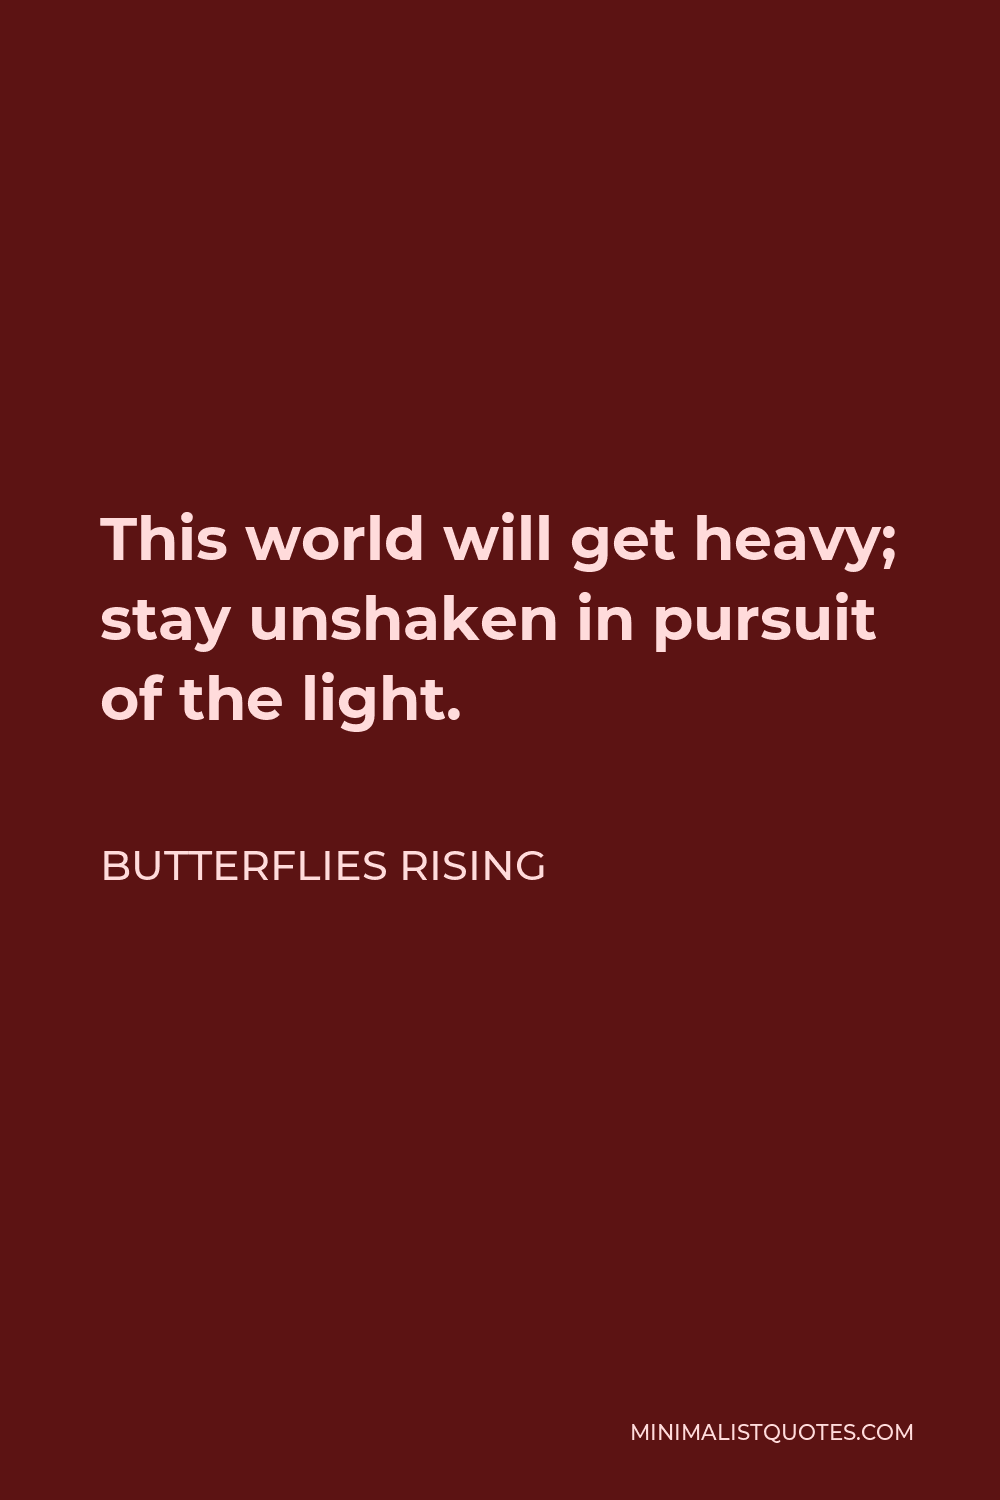 Butterflies Rising Quote - This world will get heavy; stay unshaken in pursuit of the light.